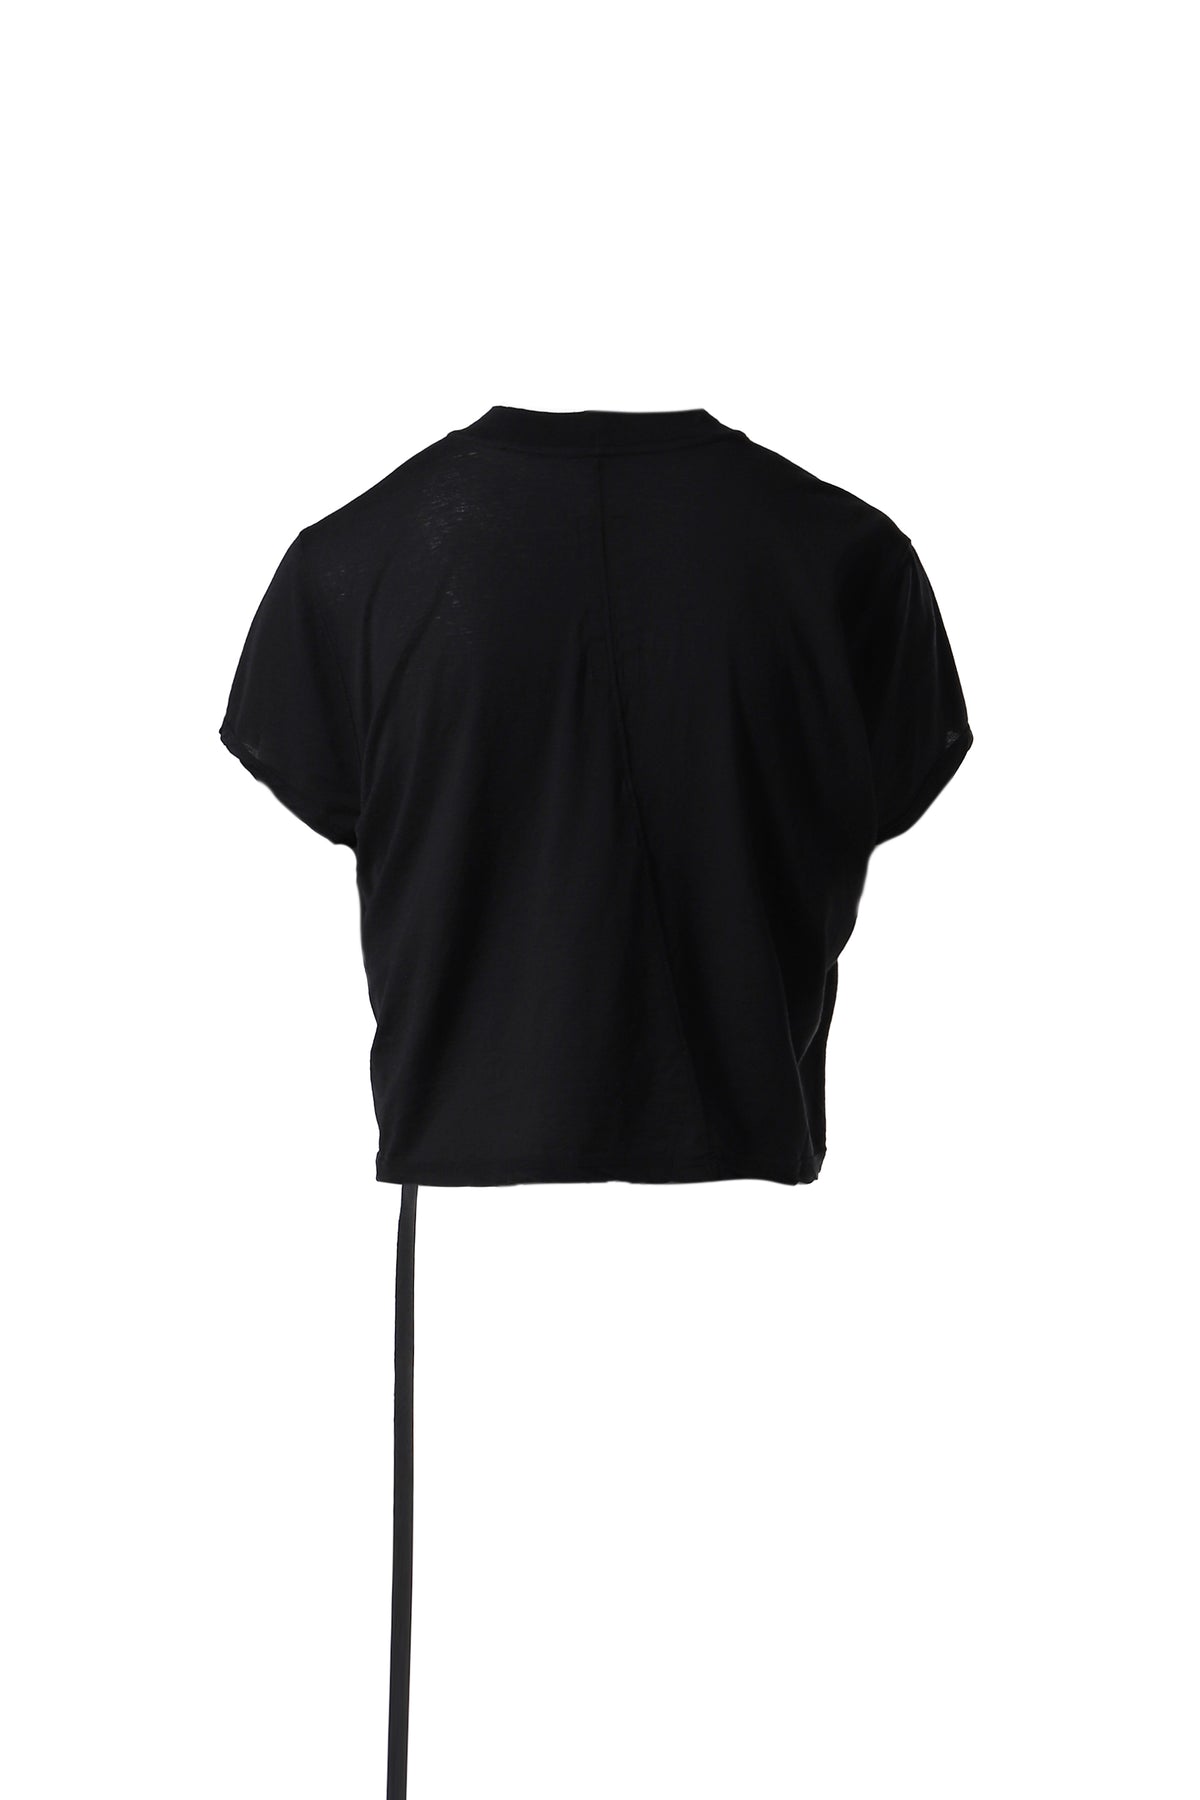 CROPPED SMALL LEVEL T / BLK